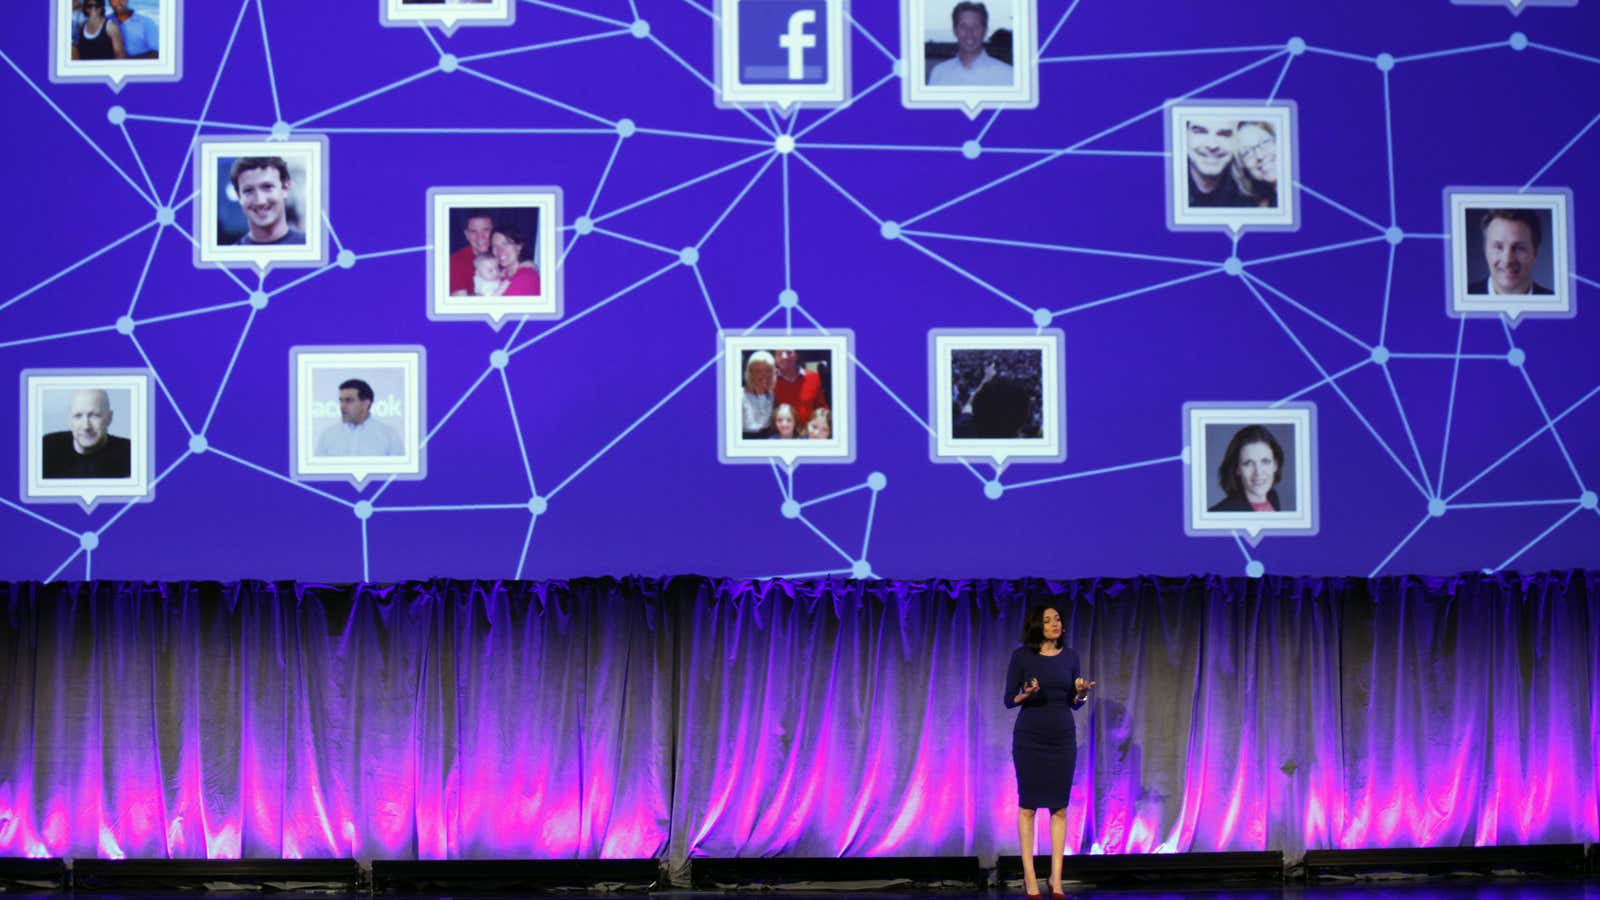 Facebook Chief Operating Officer Sheryl Sandberg delivers a keynote address at Facebook’s “fMC” global event for marketers in New York City, February 29, 2012. REUTERS/Mike…